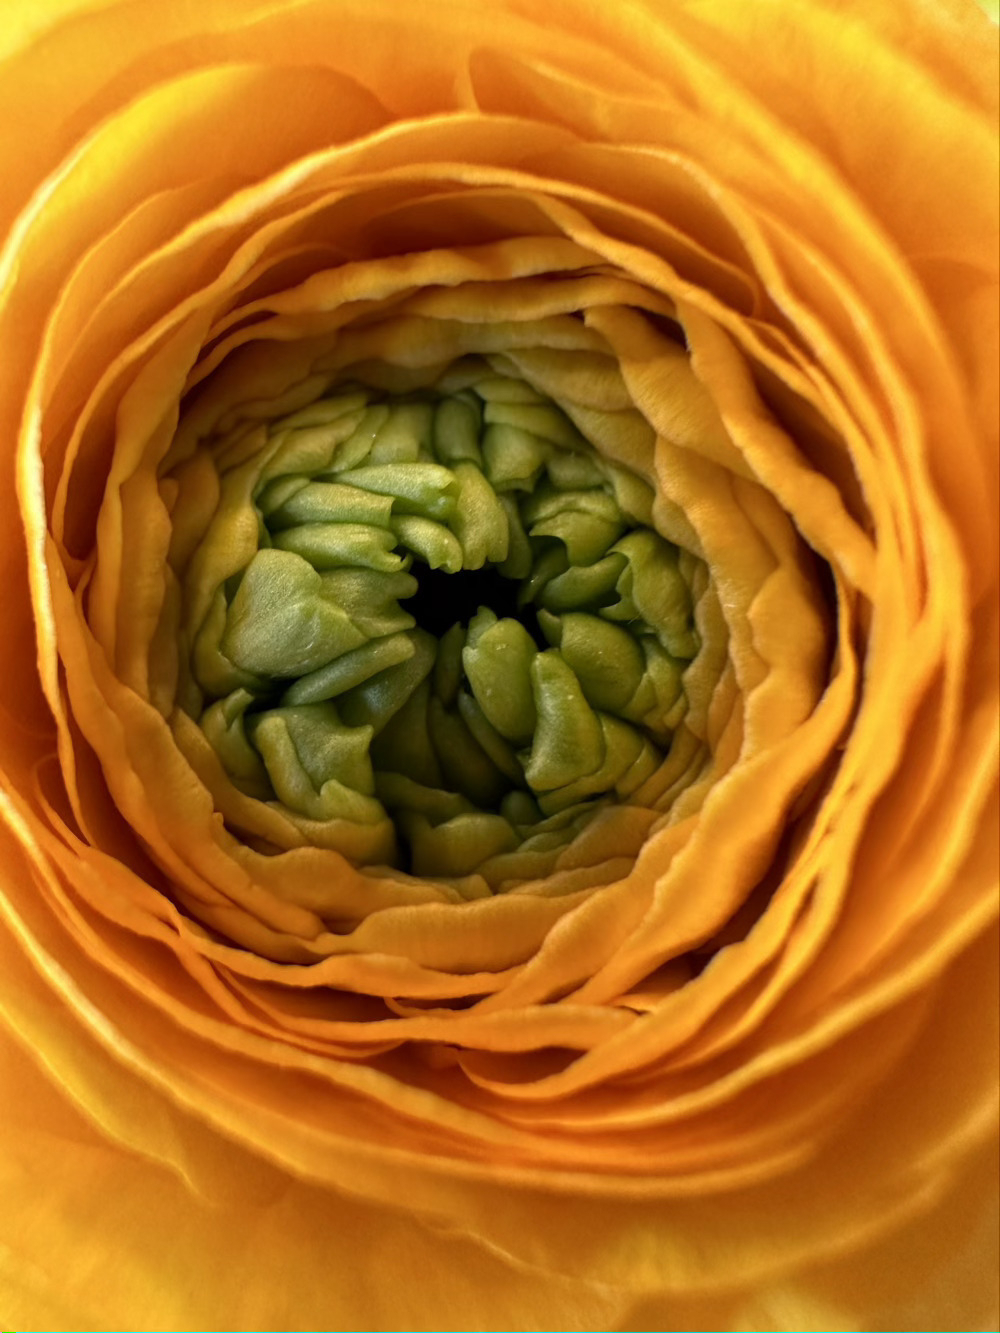 Another close up photo of a ranunculus flower.